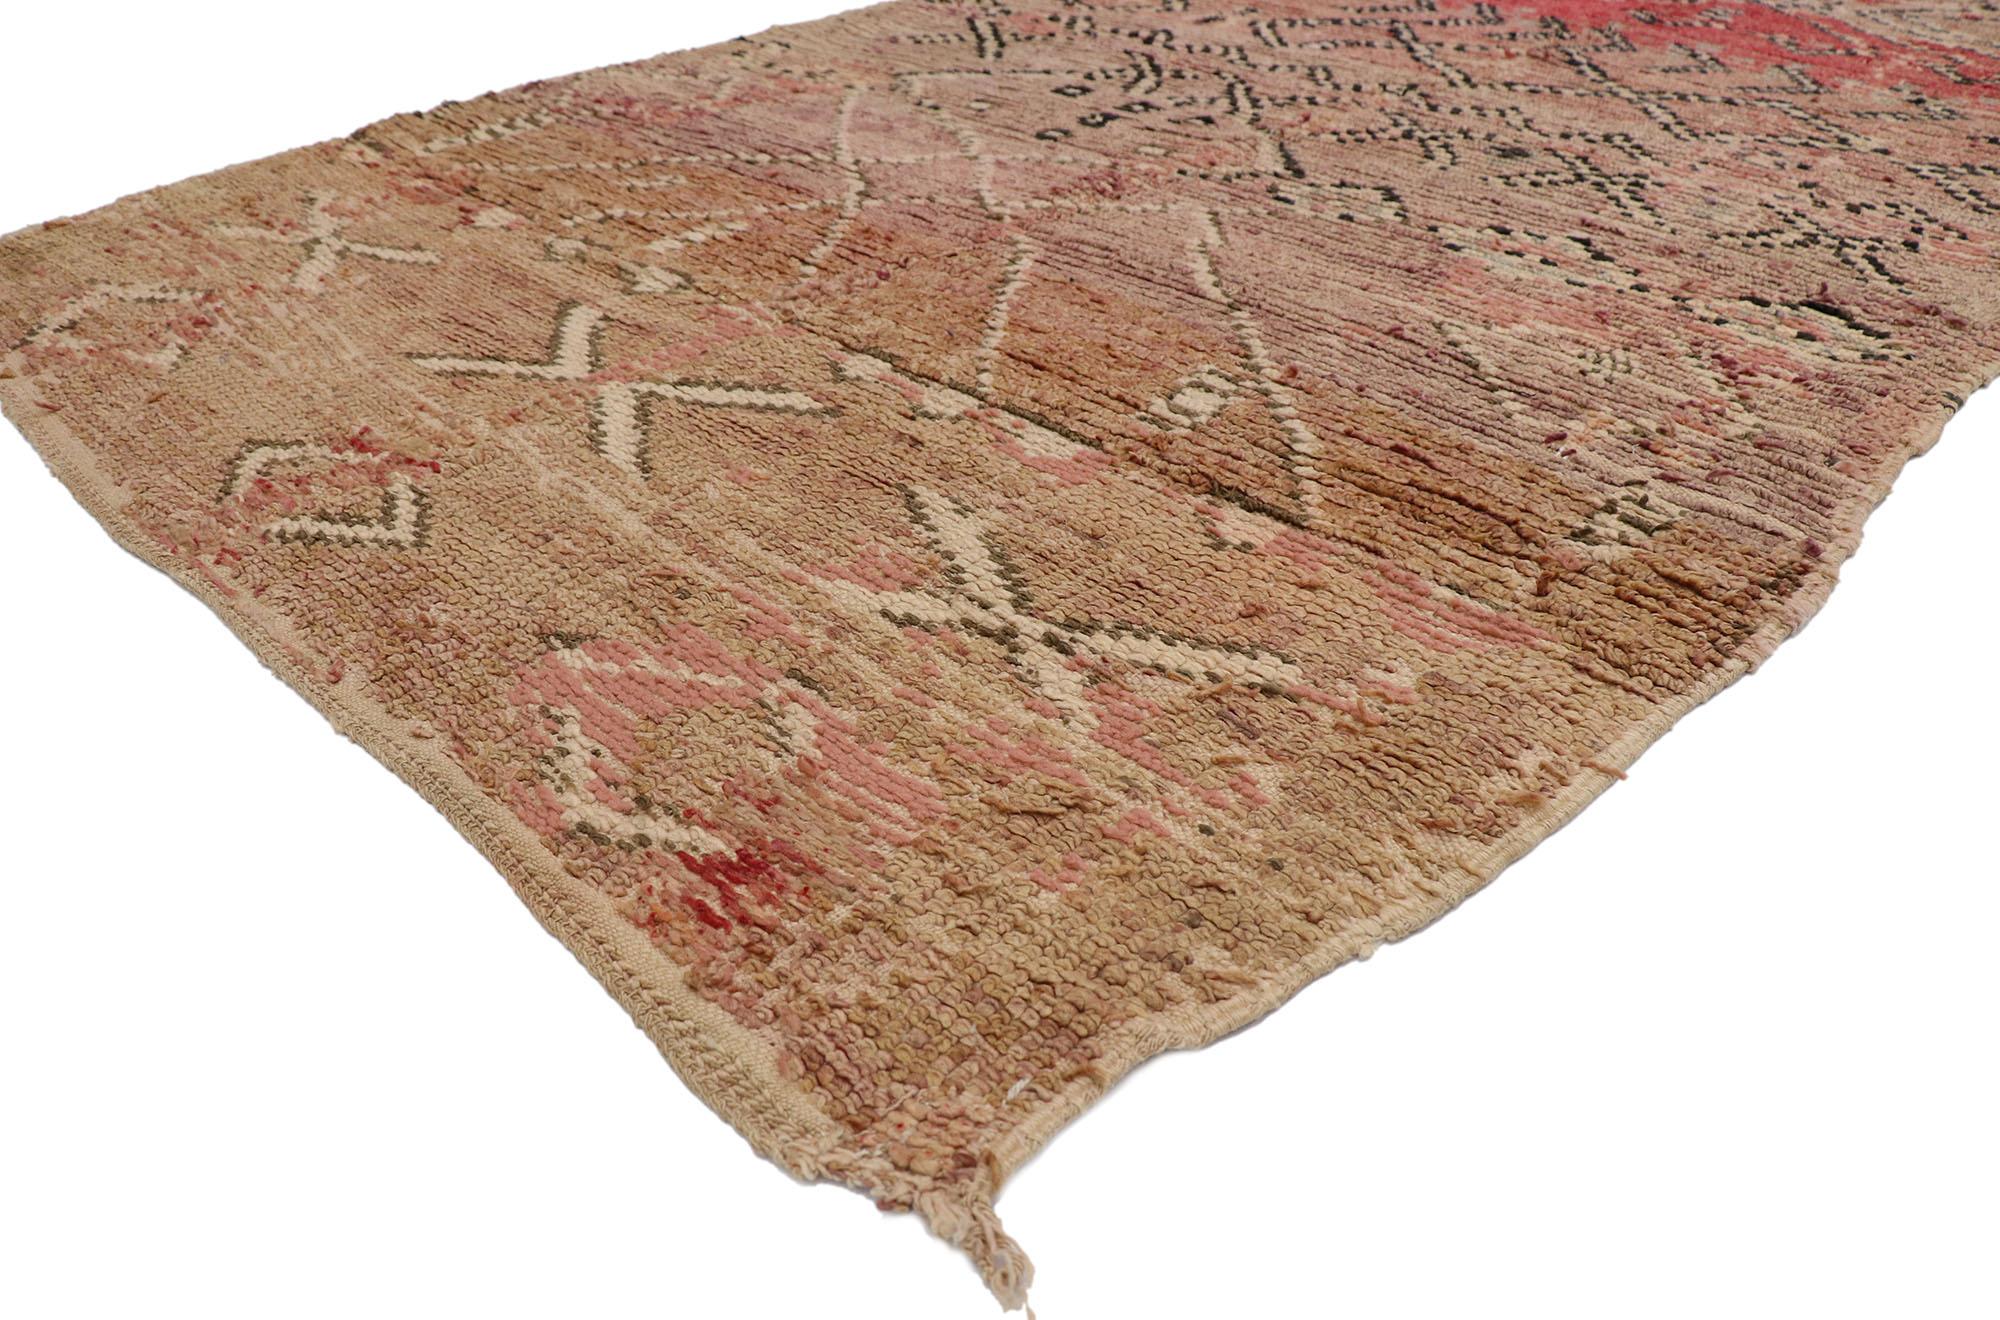 21423 Vintage Moroccan Rug, 05'06 x 09'03.
Wabi-Sabi meets rustic charm in this hand-knotted wool vintage Moroccan rug. The intrinsic tribal design and sunbaked earth-tone colors woven into this piece work together creating a coveted laid-back